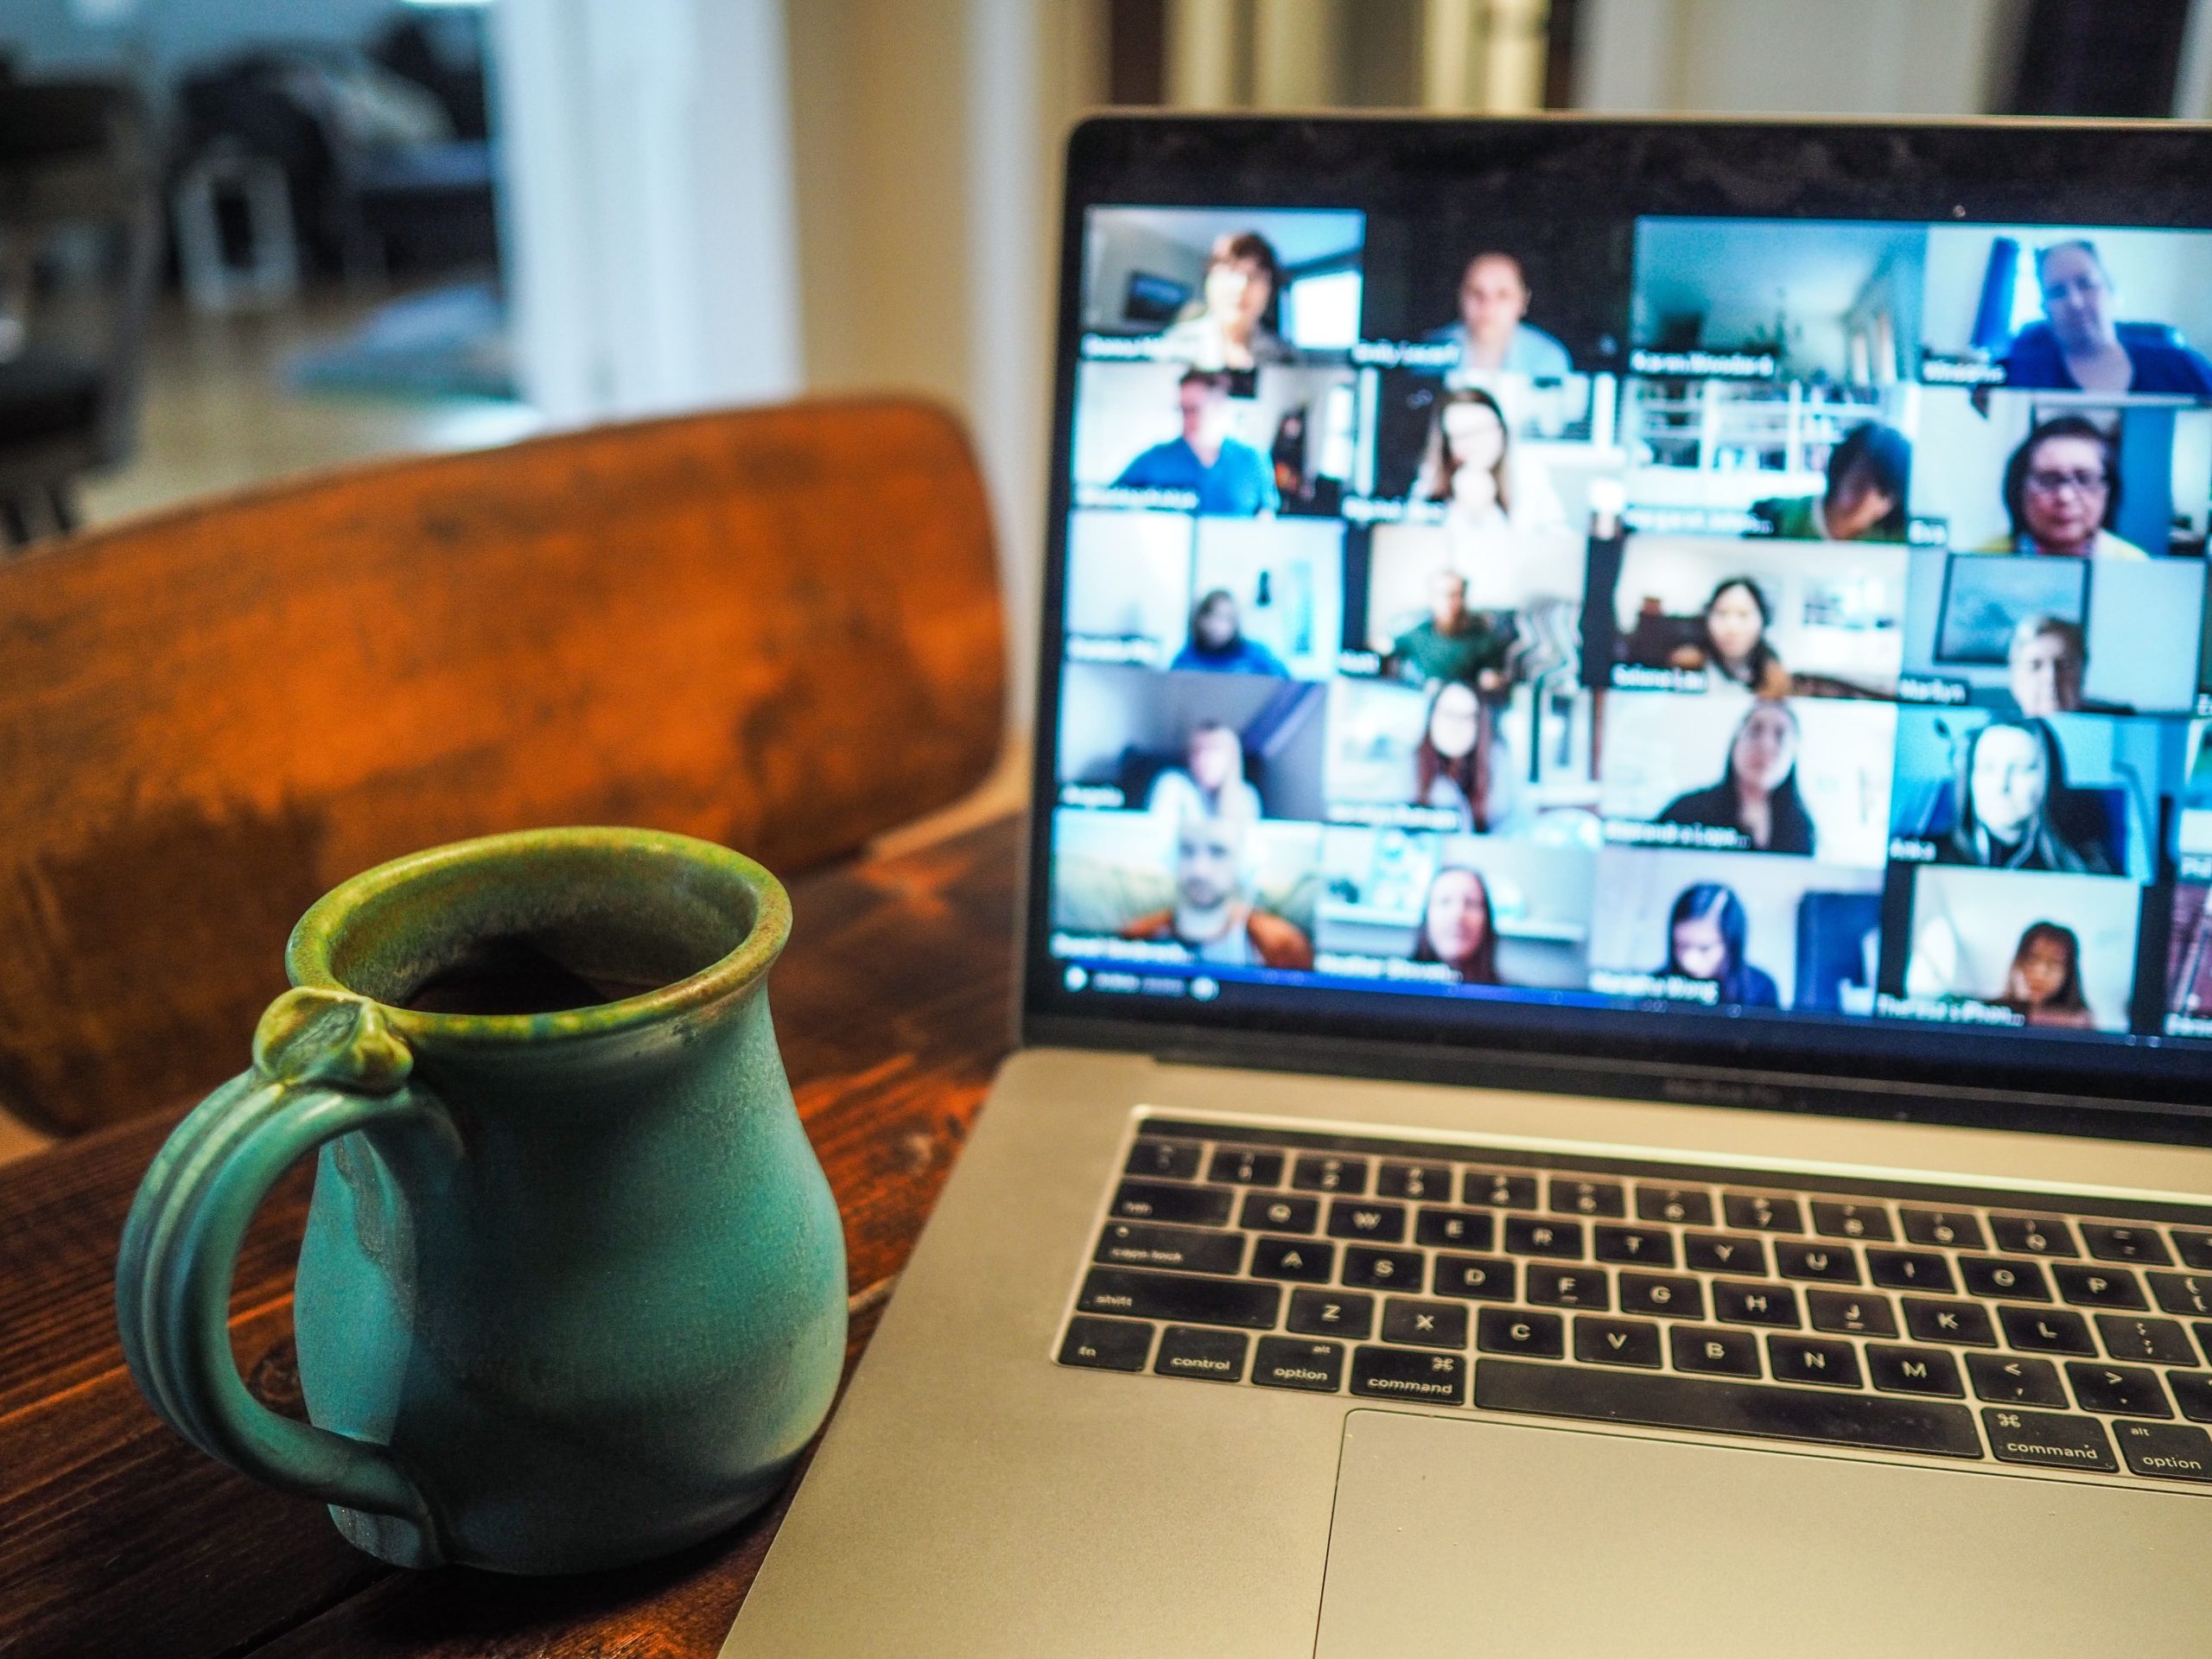 Laptop shows a screen with numerous faces of people all together on a virtual call with a coffee cup in the foreground